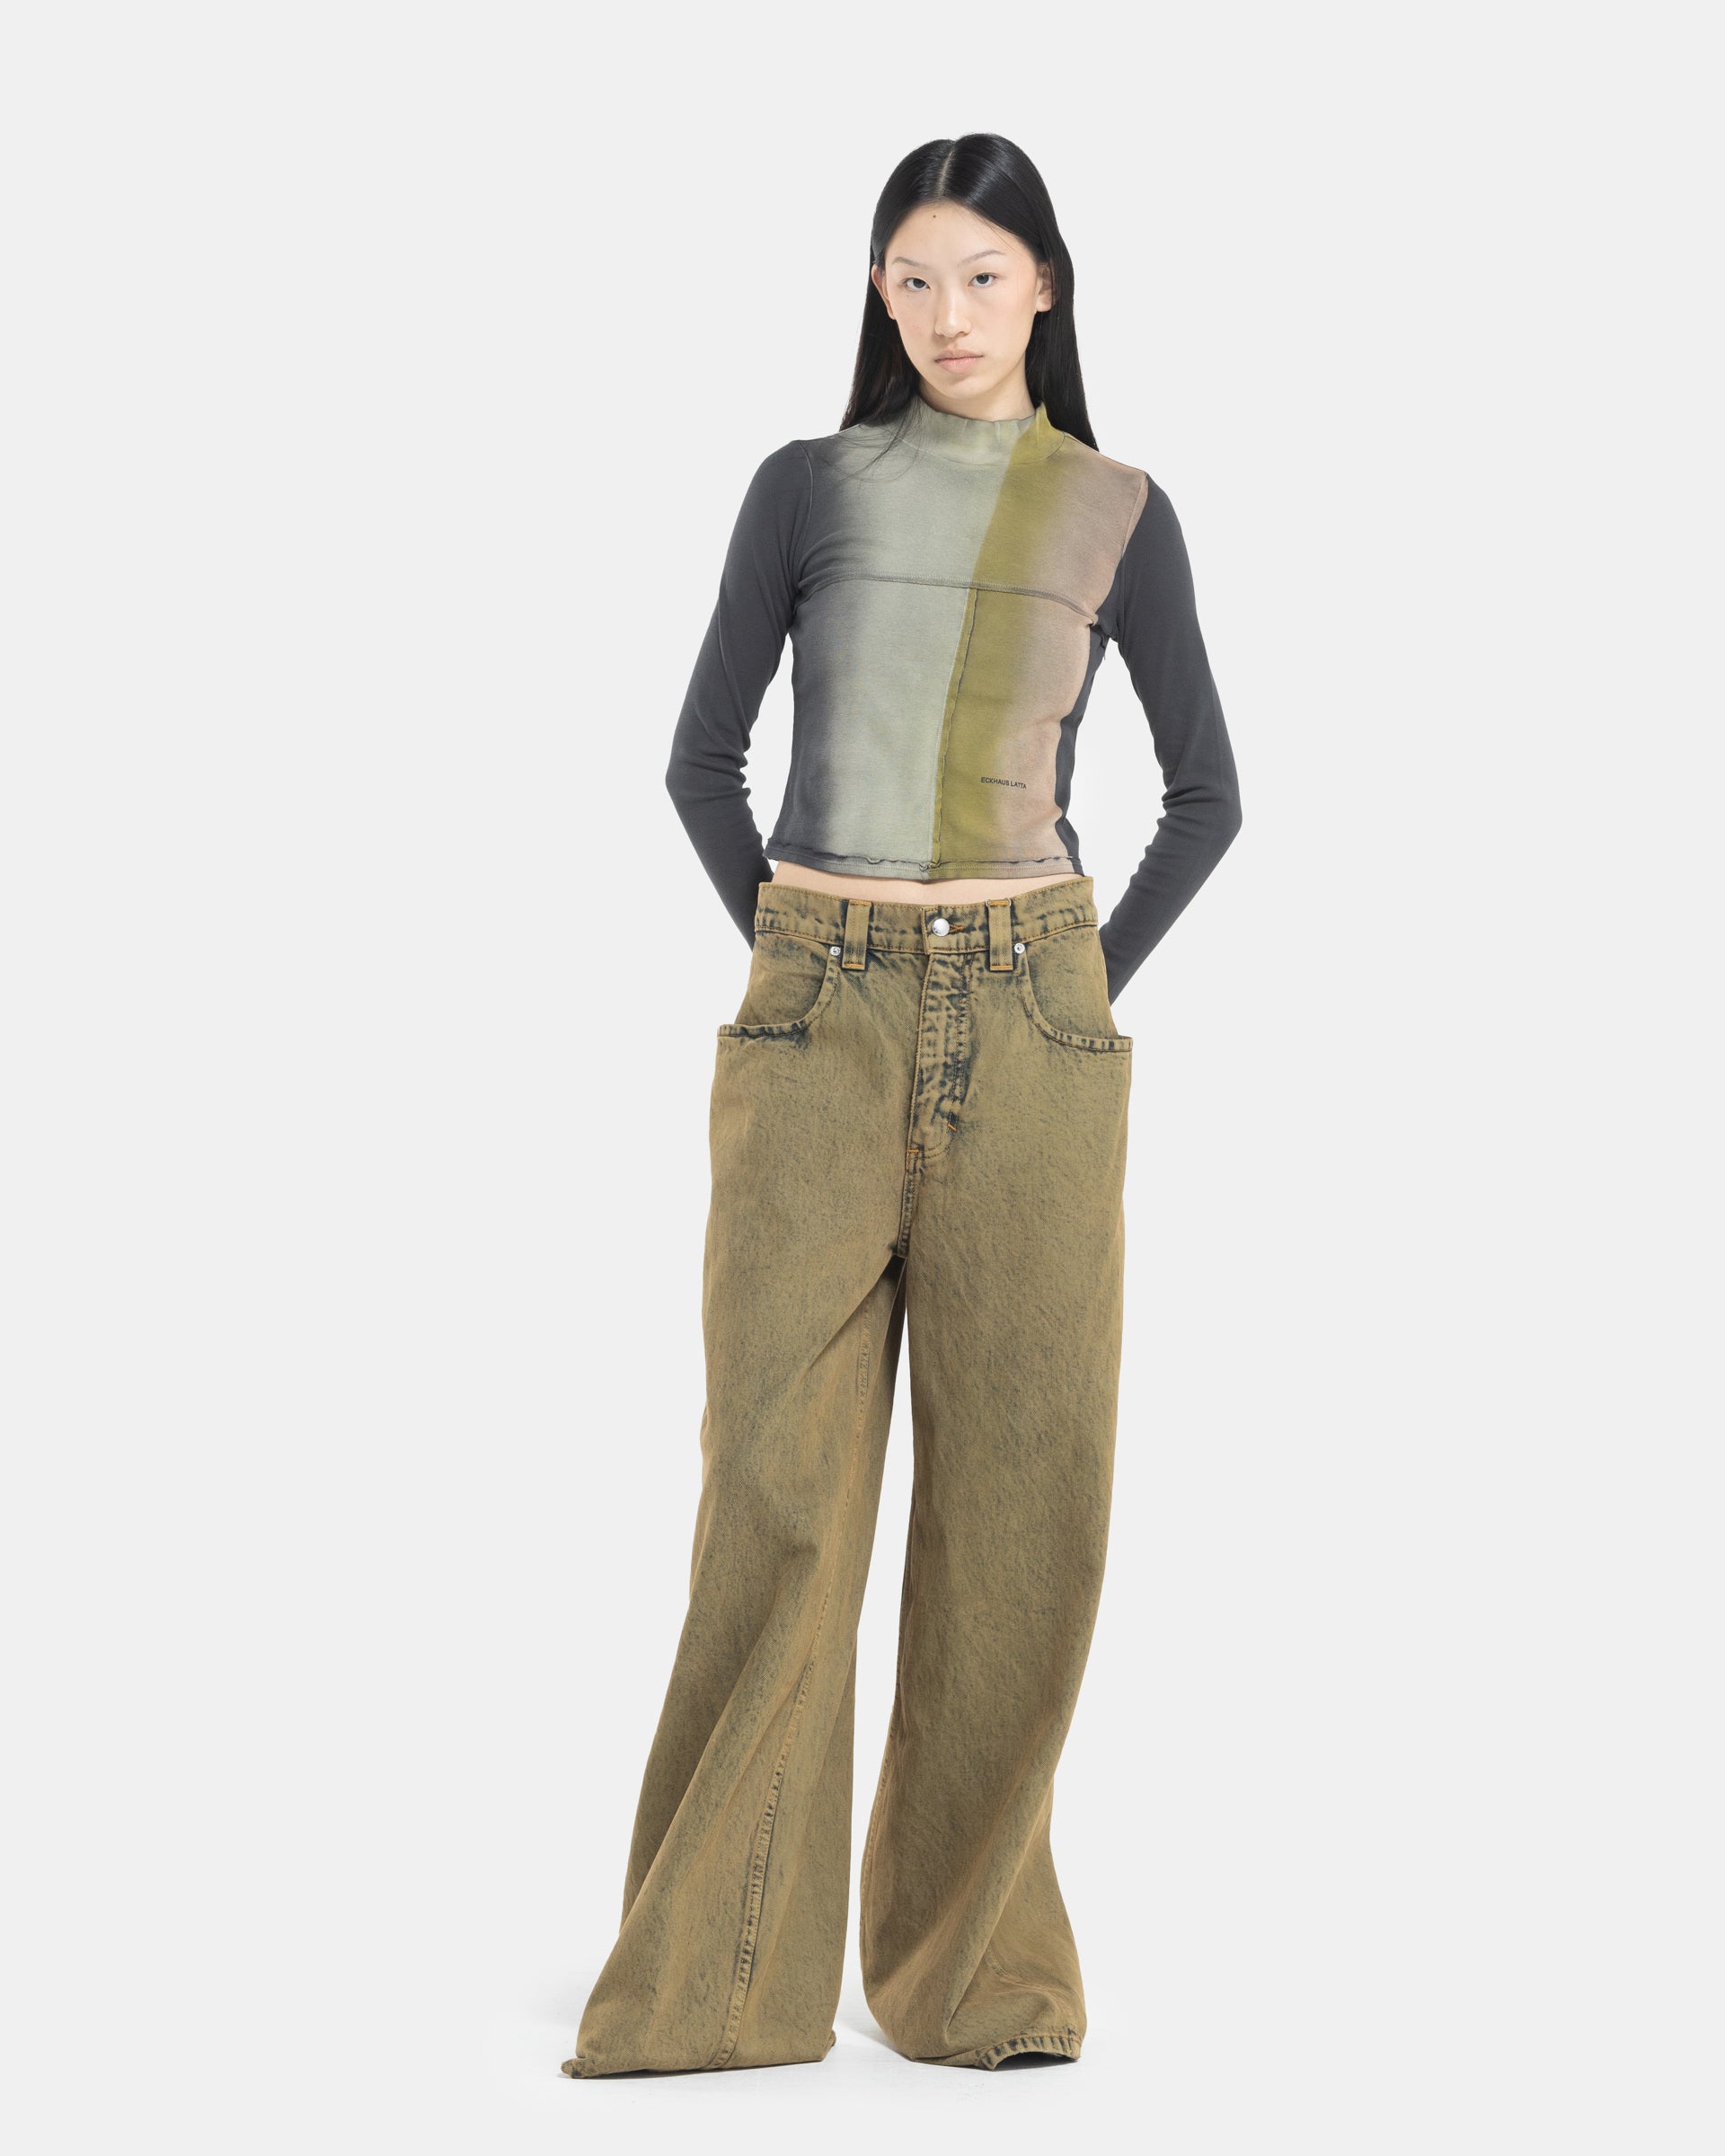 Female model wearing a Eckhaus Latta Lapped Baby Turtleneck and ultra-wide jeans